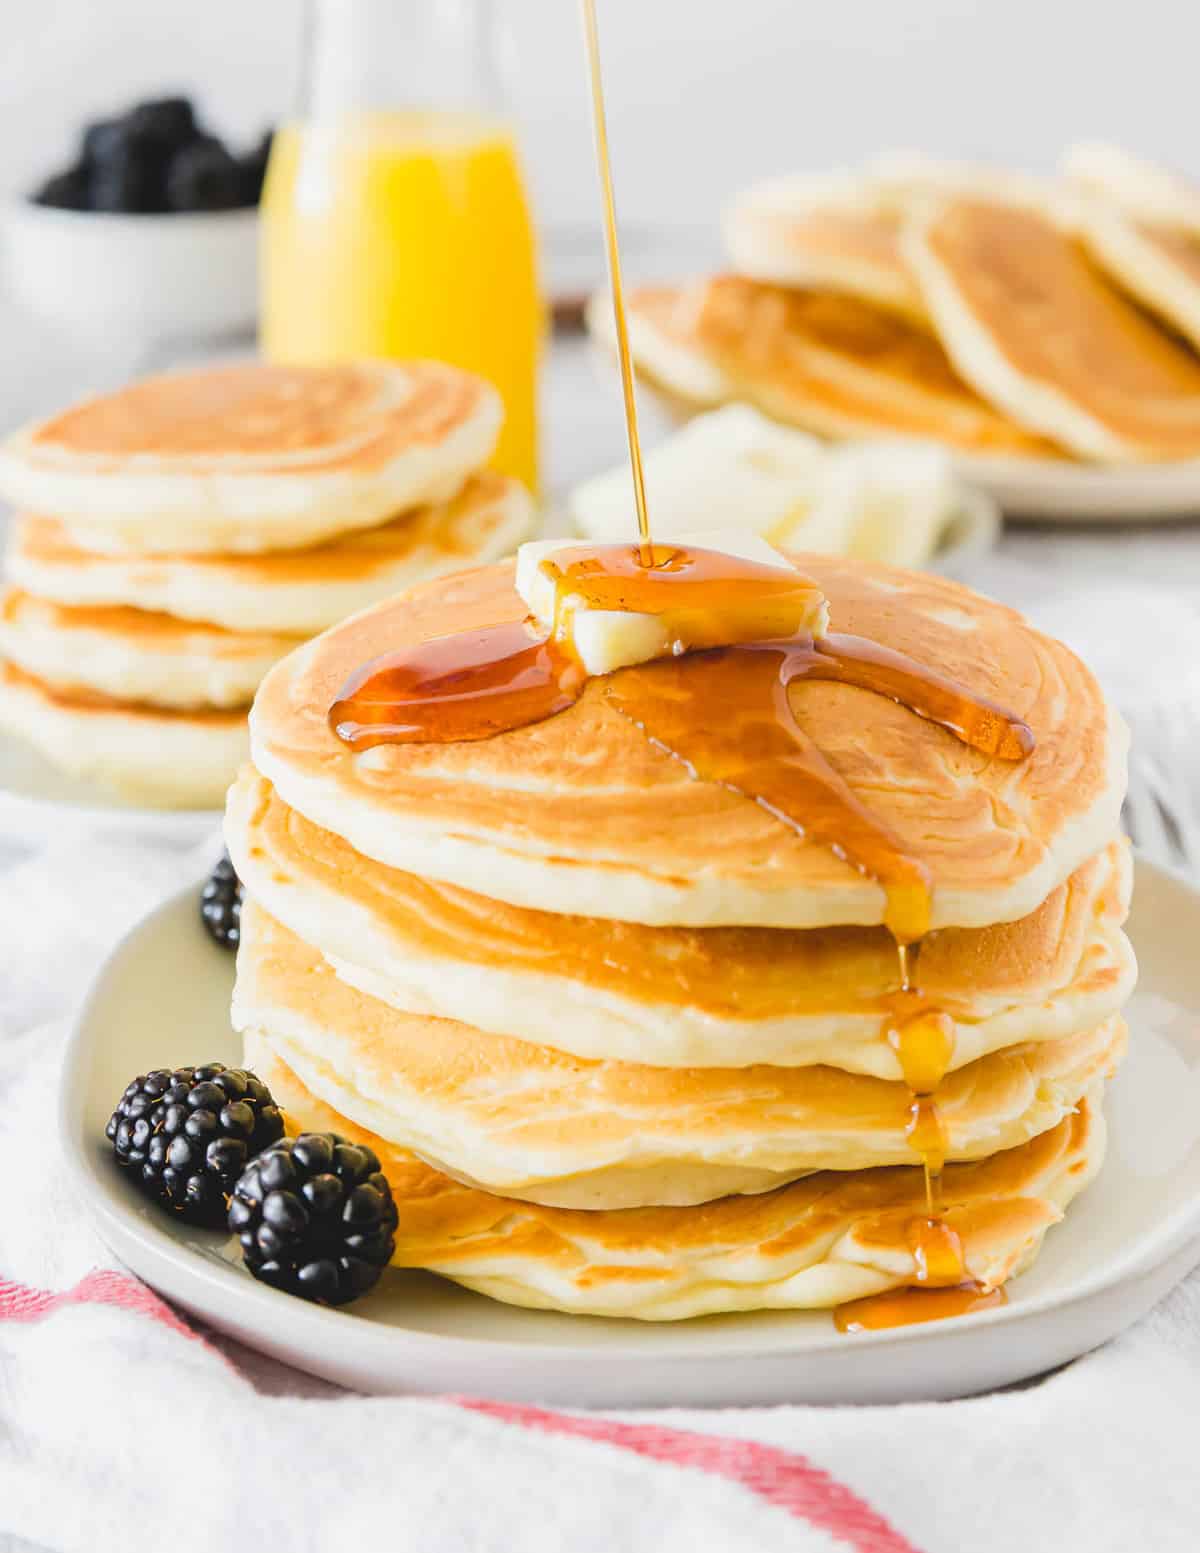 Syrup being poured on a stack of fluffy pancakes.